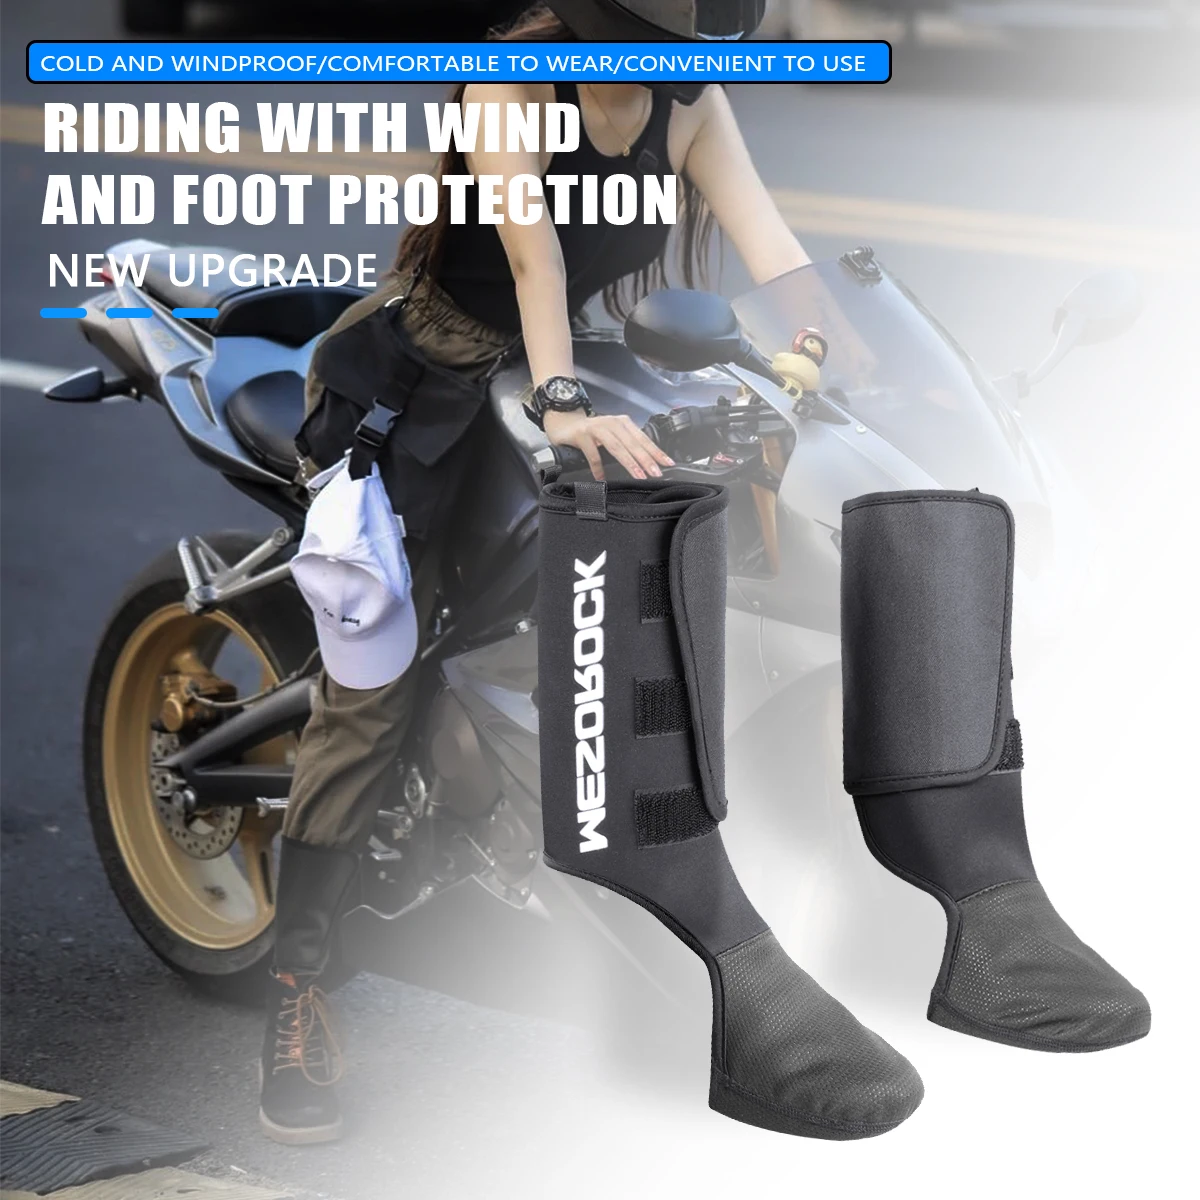 Windproof Ankle Protector for Motorcycle Riding, Outdoor Skiing, Warm Leg Covers Velvet Foot Covers, Cold-proof Equipment Winter